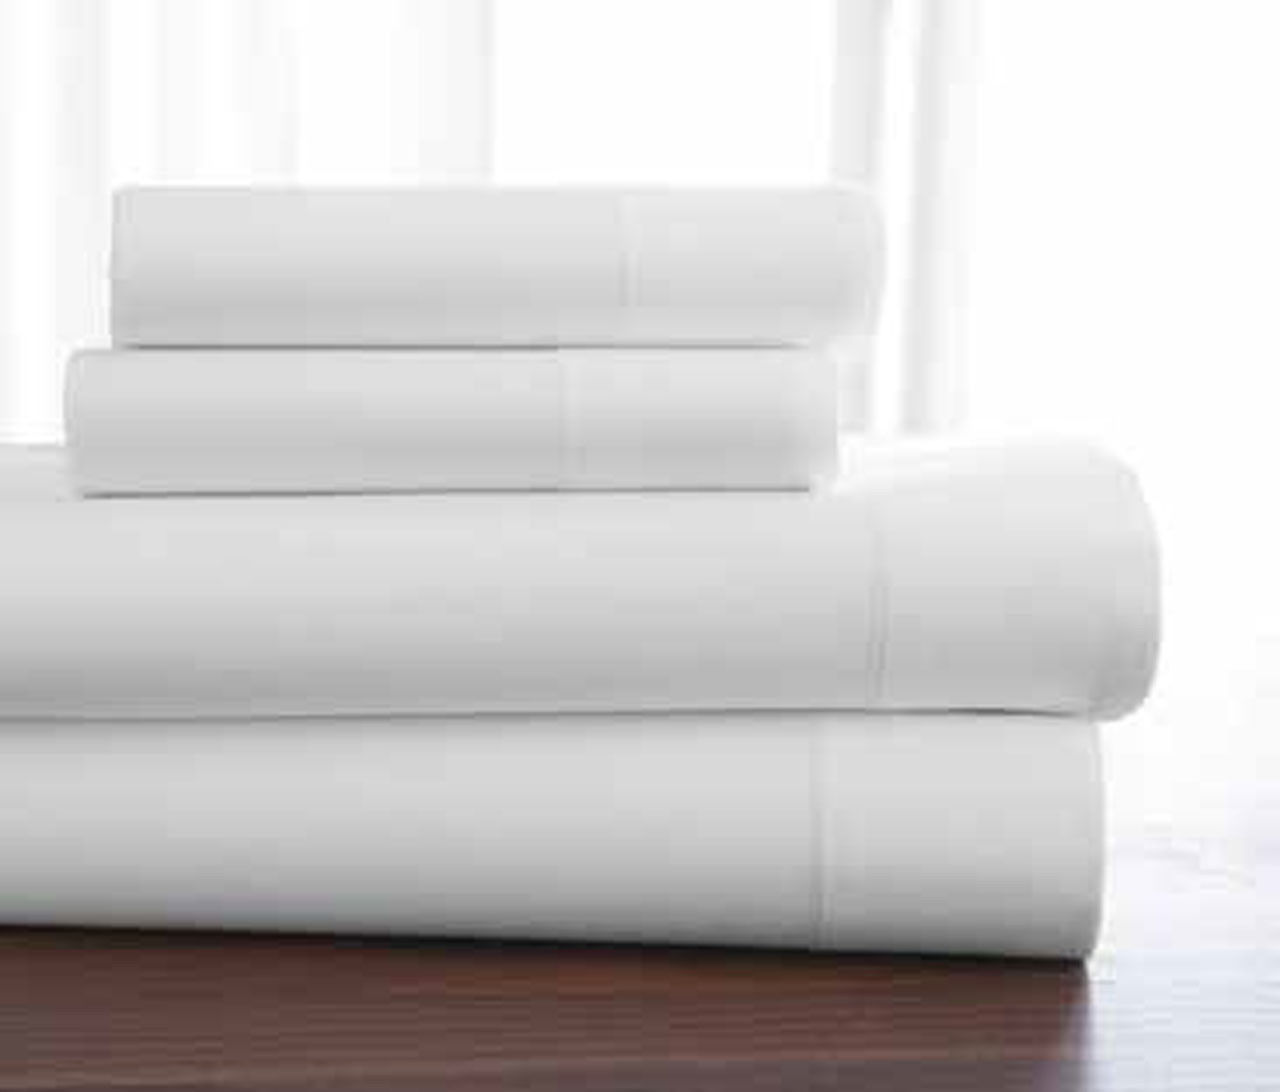 To which regions do they deliver Welspun T-400 Premium hygrocotton sheets?